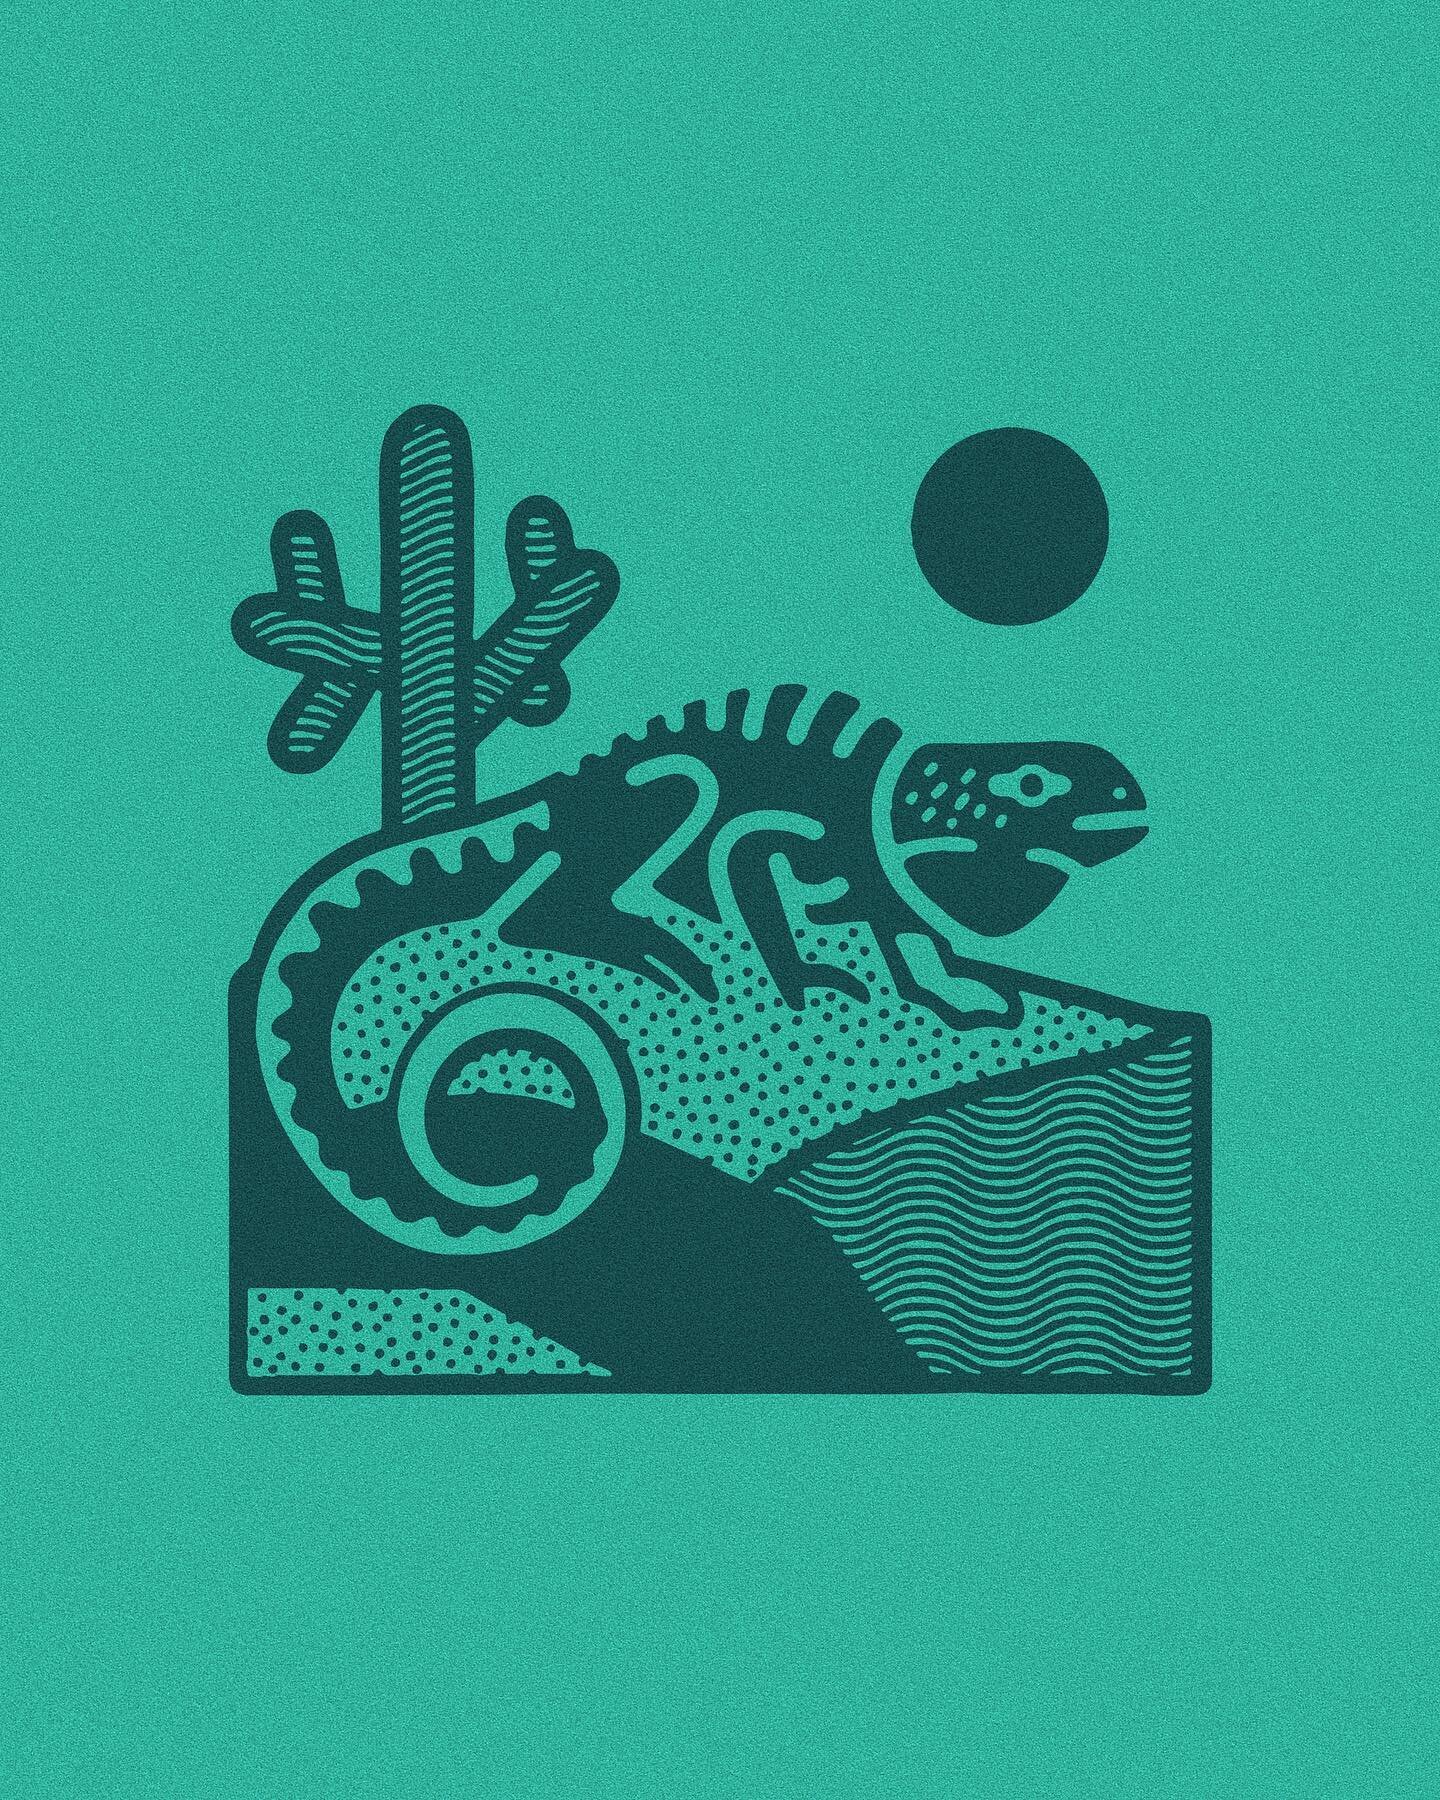 Last of the set, the Collared Lizard for my contribution to the @yeti Artist Series! Swipe to see the full set of desert dwelling friends!

These designs are available for customizing YETI merch on their website. Thankful to have been asked to partic